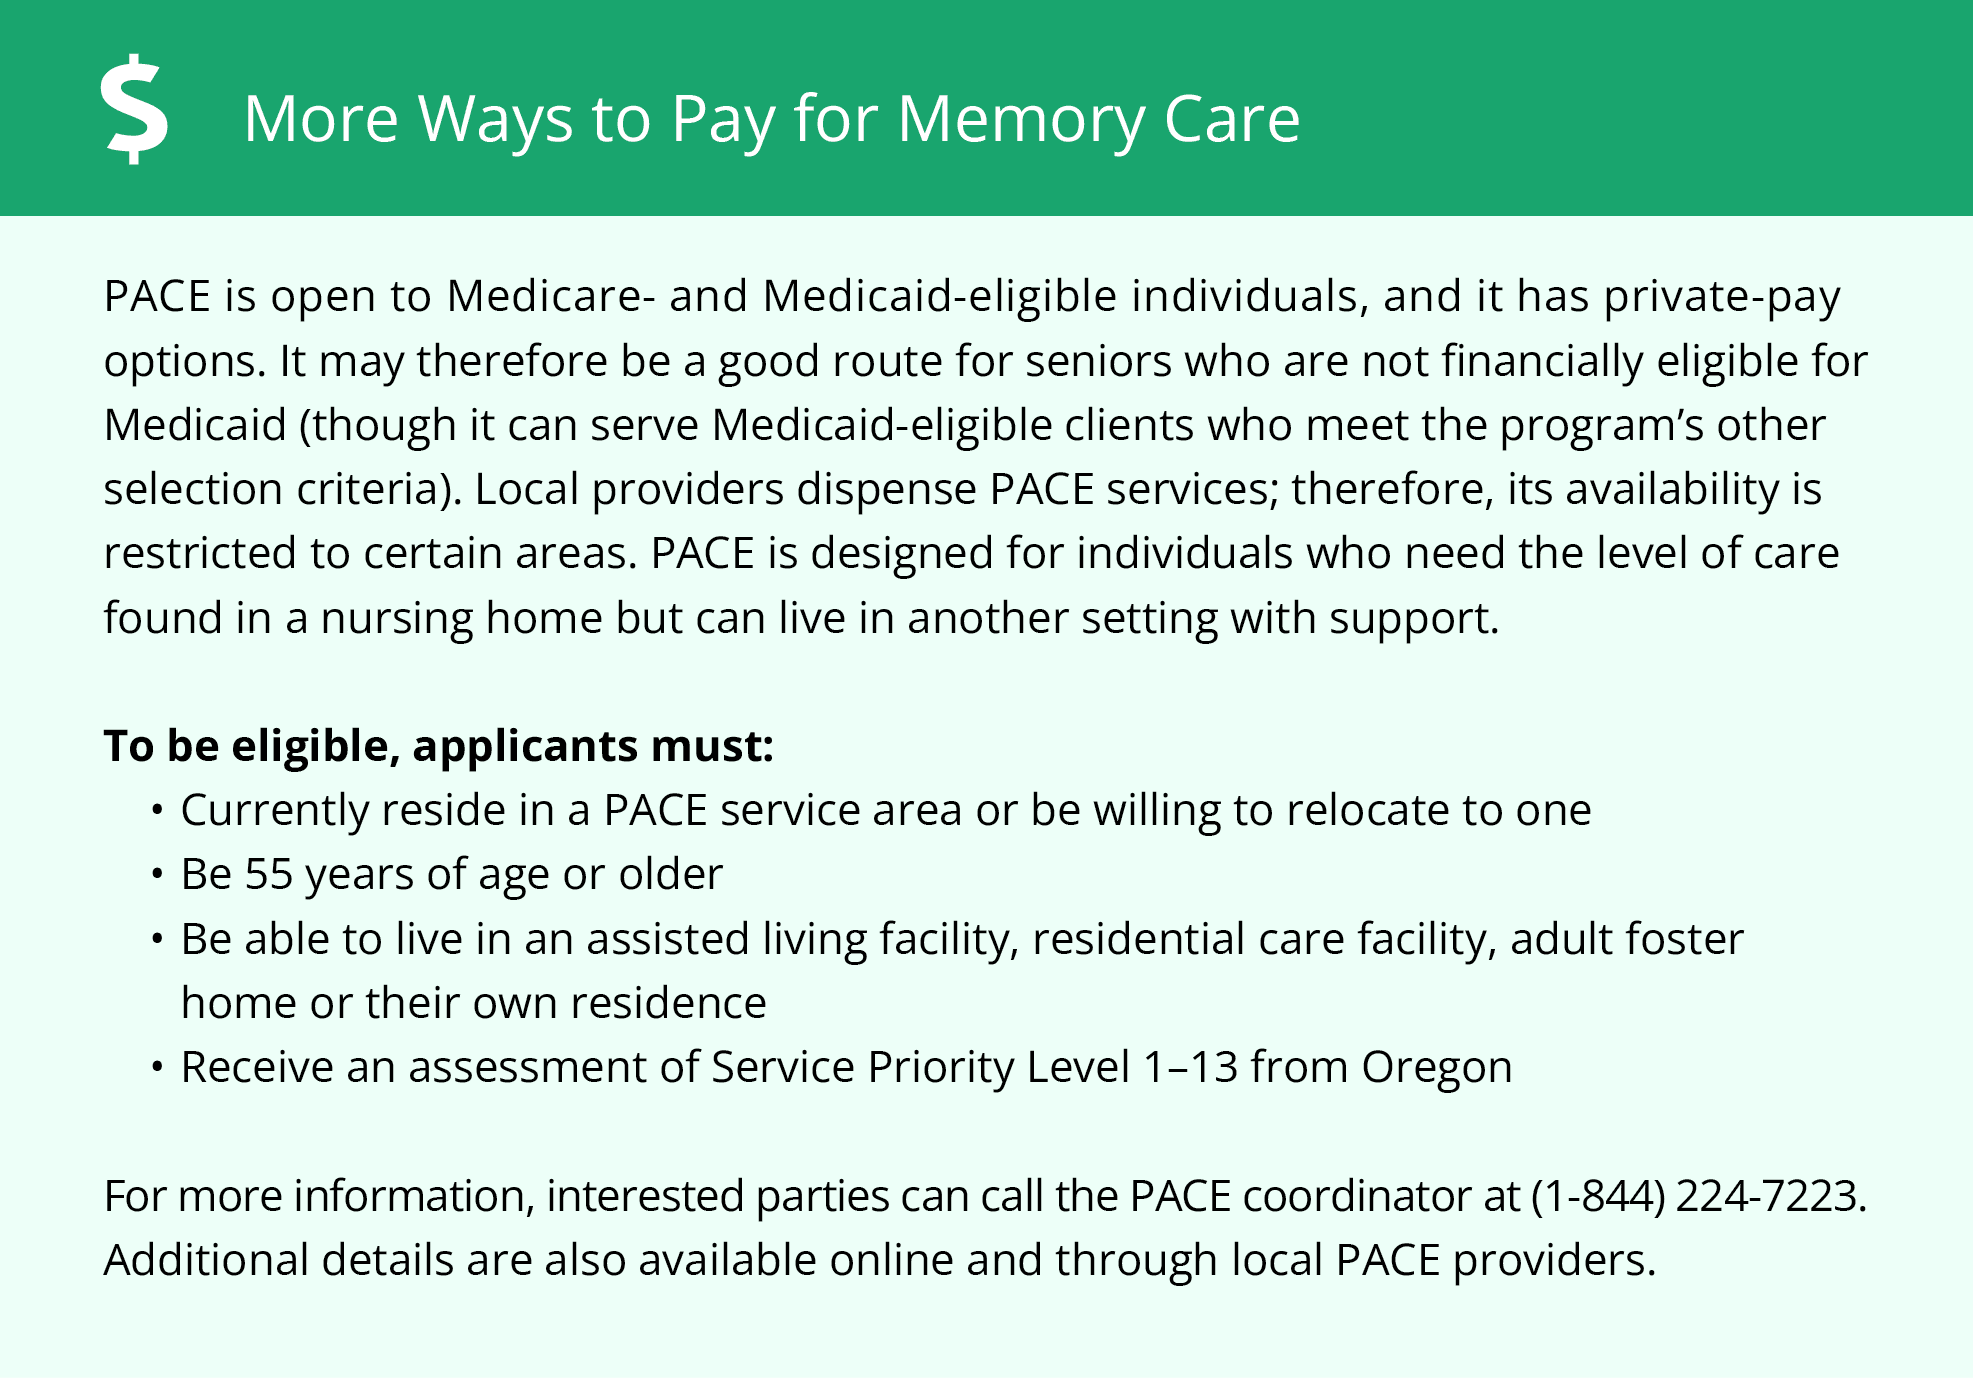 More Ways to Pay for Memory Care in Oregon